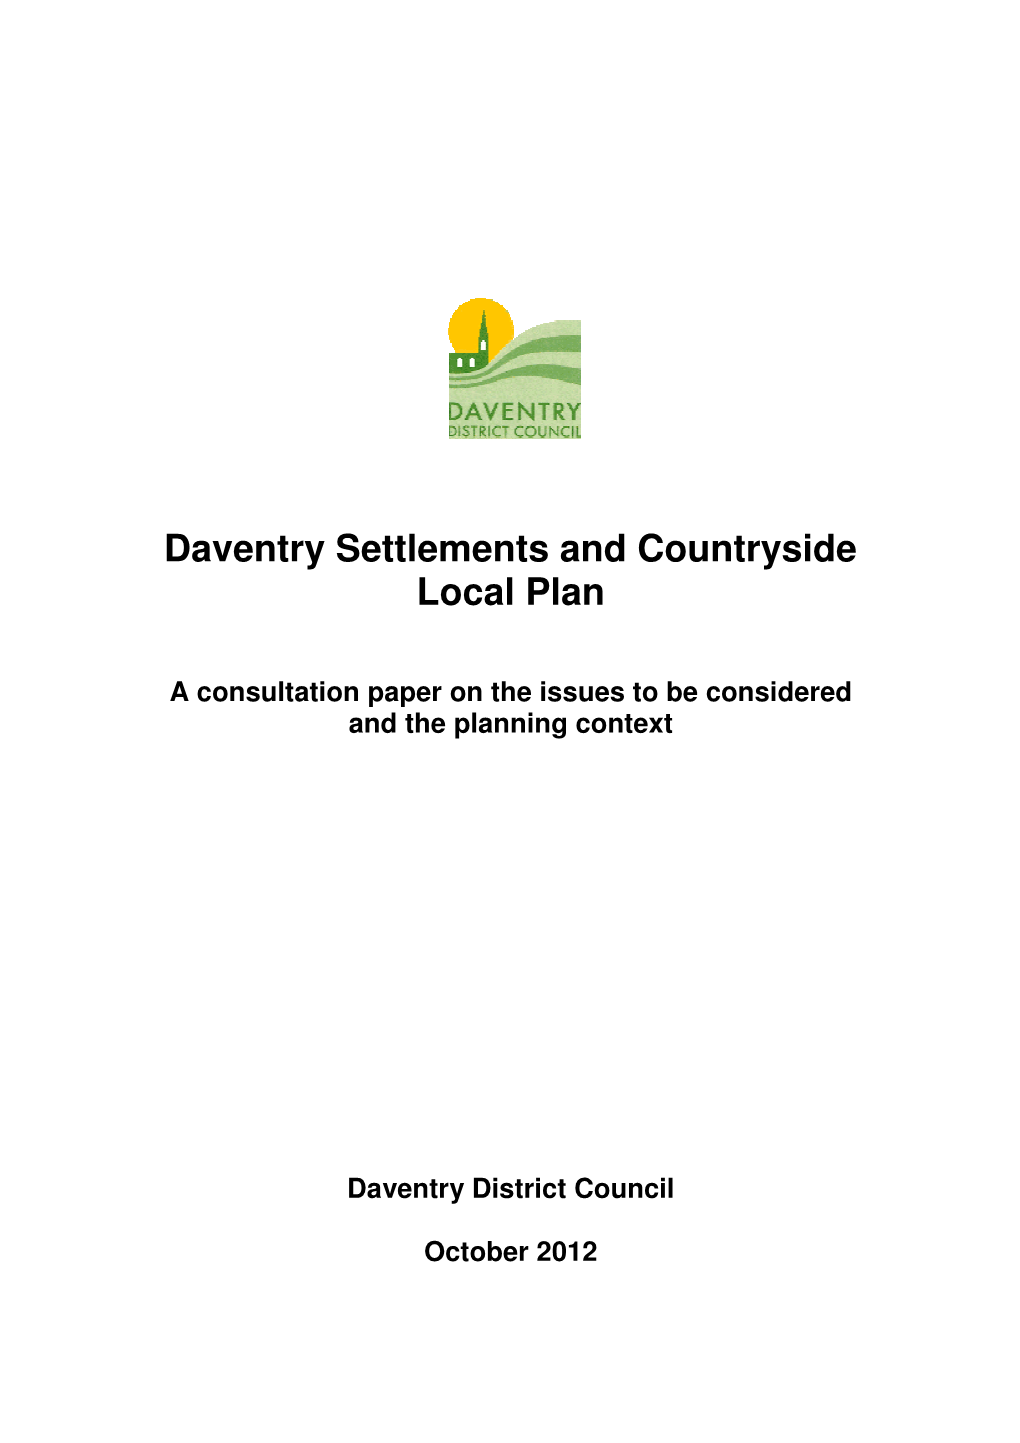 Daventry Settlements and Countryside Local Plan